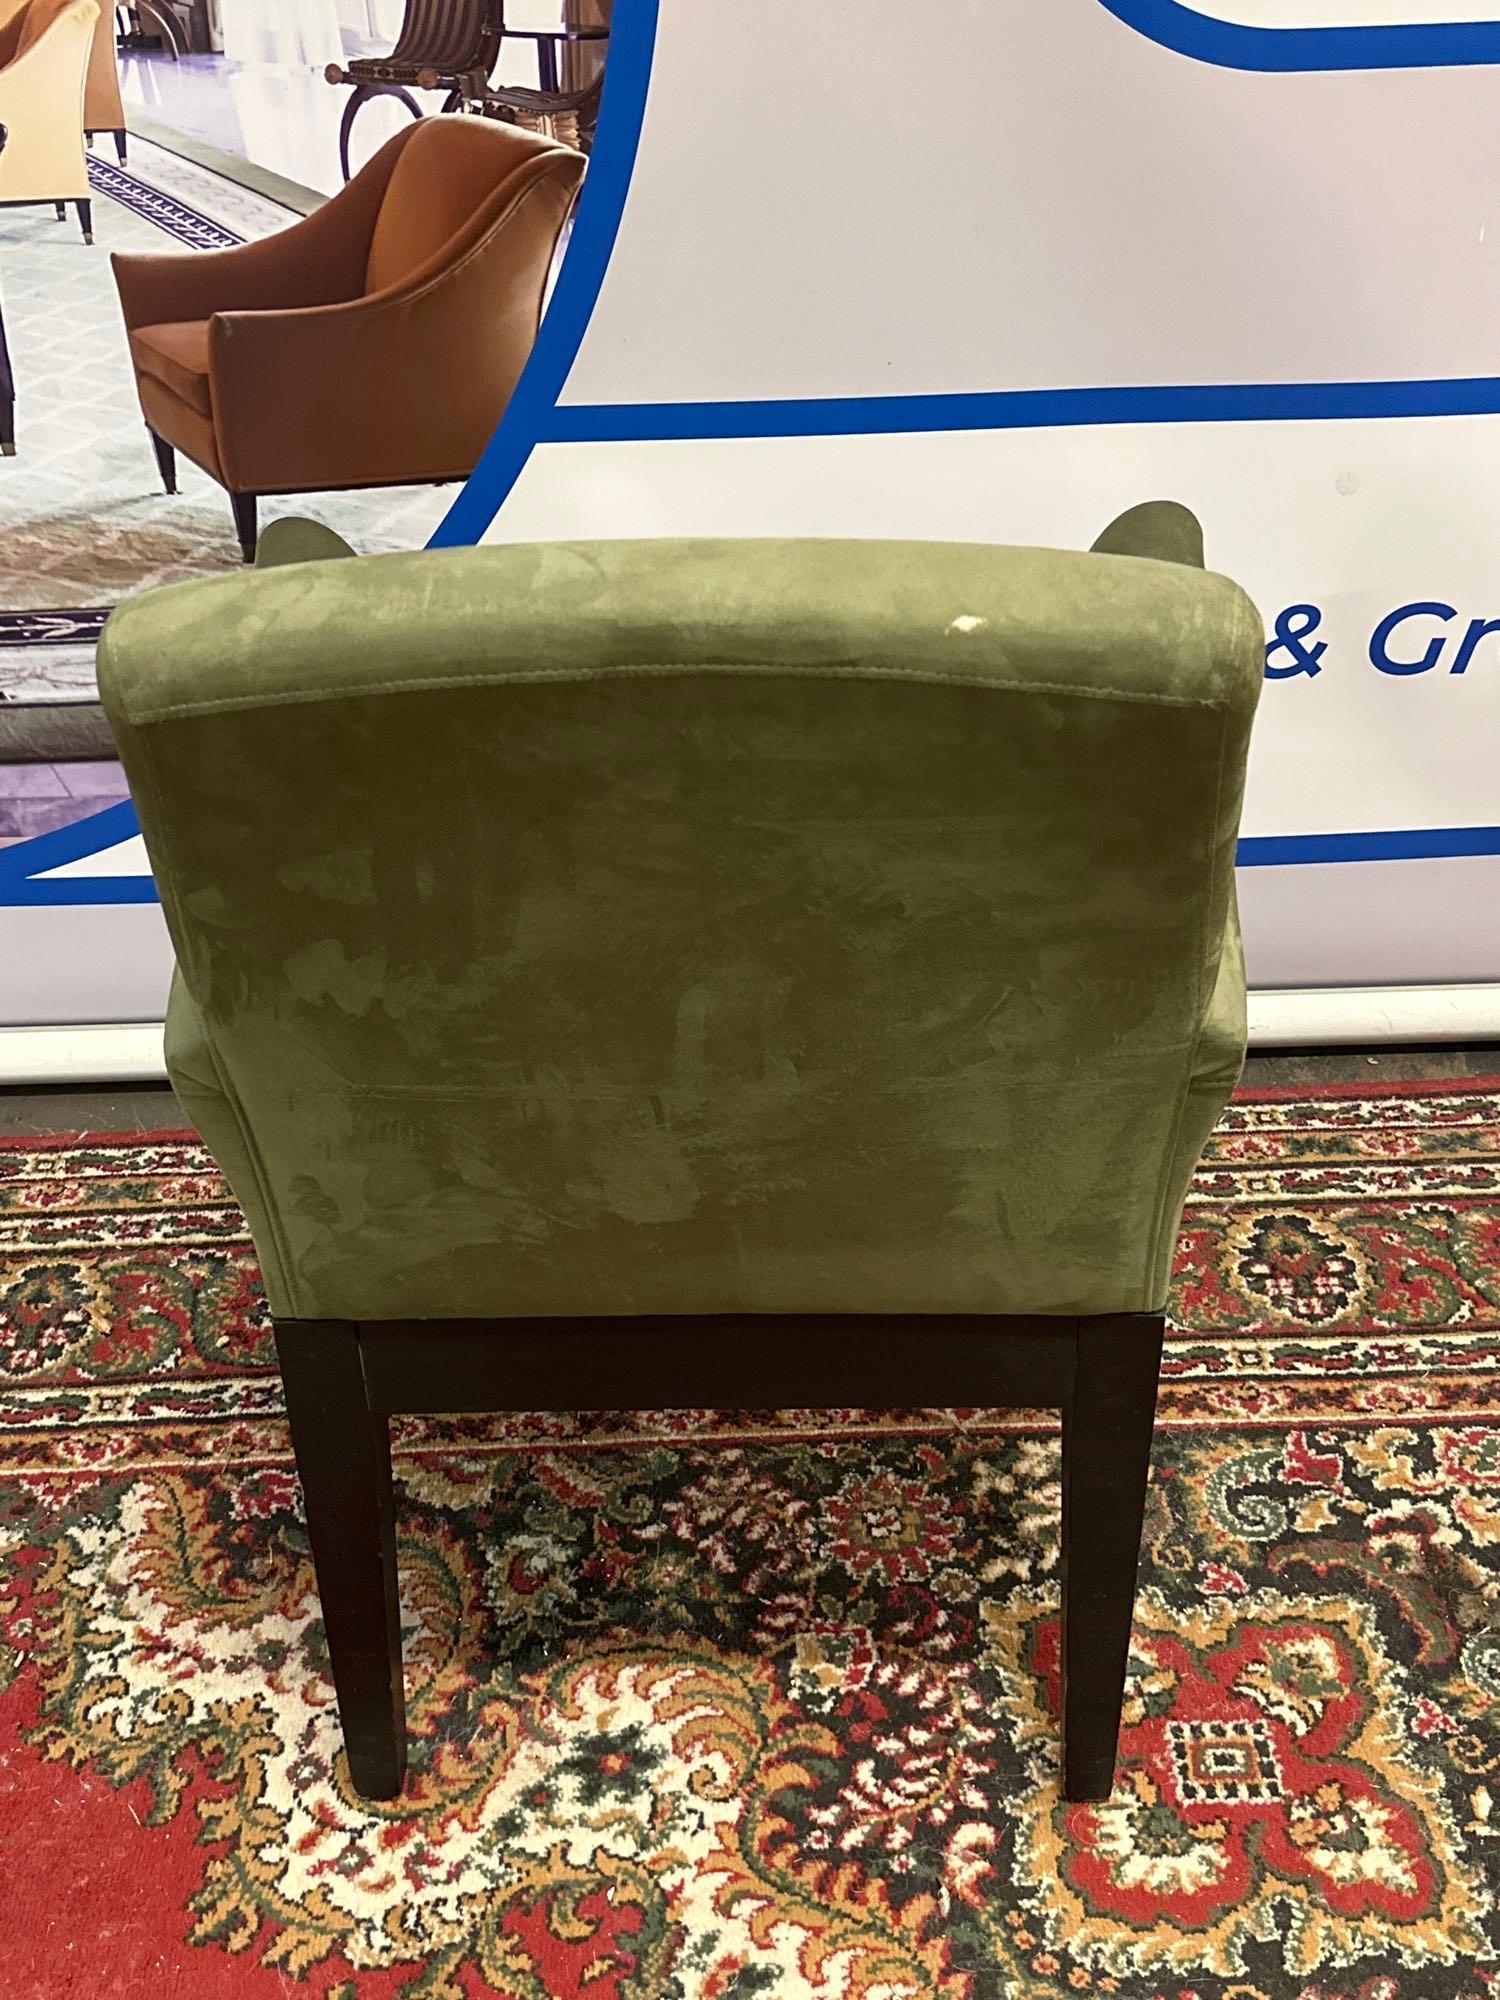 Accent Chair Upholstered In A Green Suede Fabric On Dark Wooden Frame 64 x 55 x 87cm - Image 3 of 5